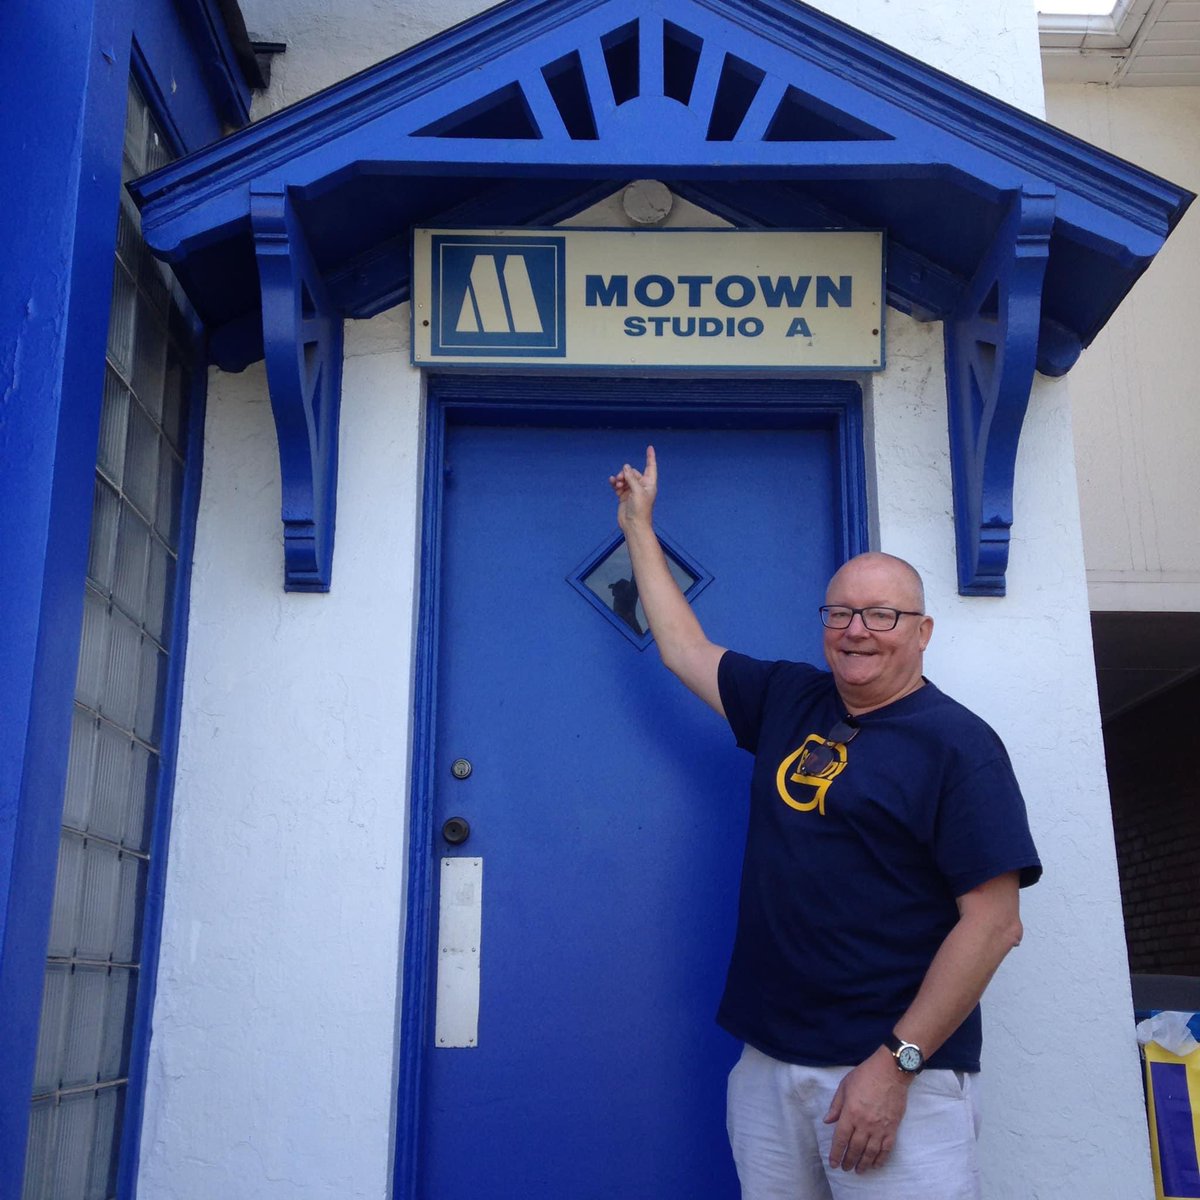 Our Motown Monday continues tonight from 7 with Dave Brown - playing hits and treasures from the post-1968 era.